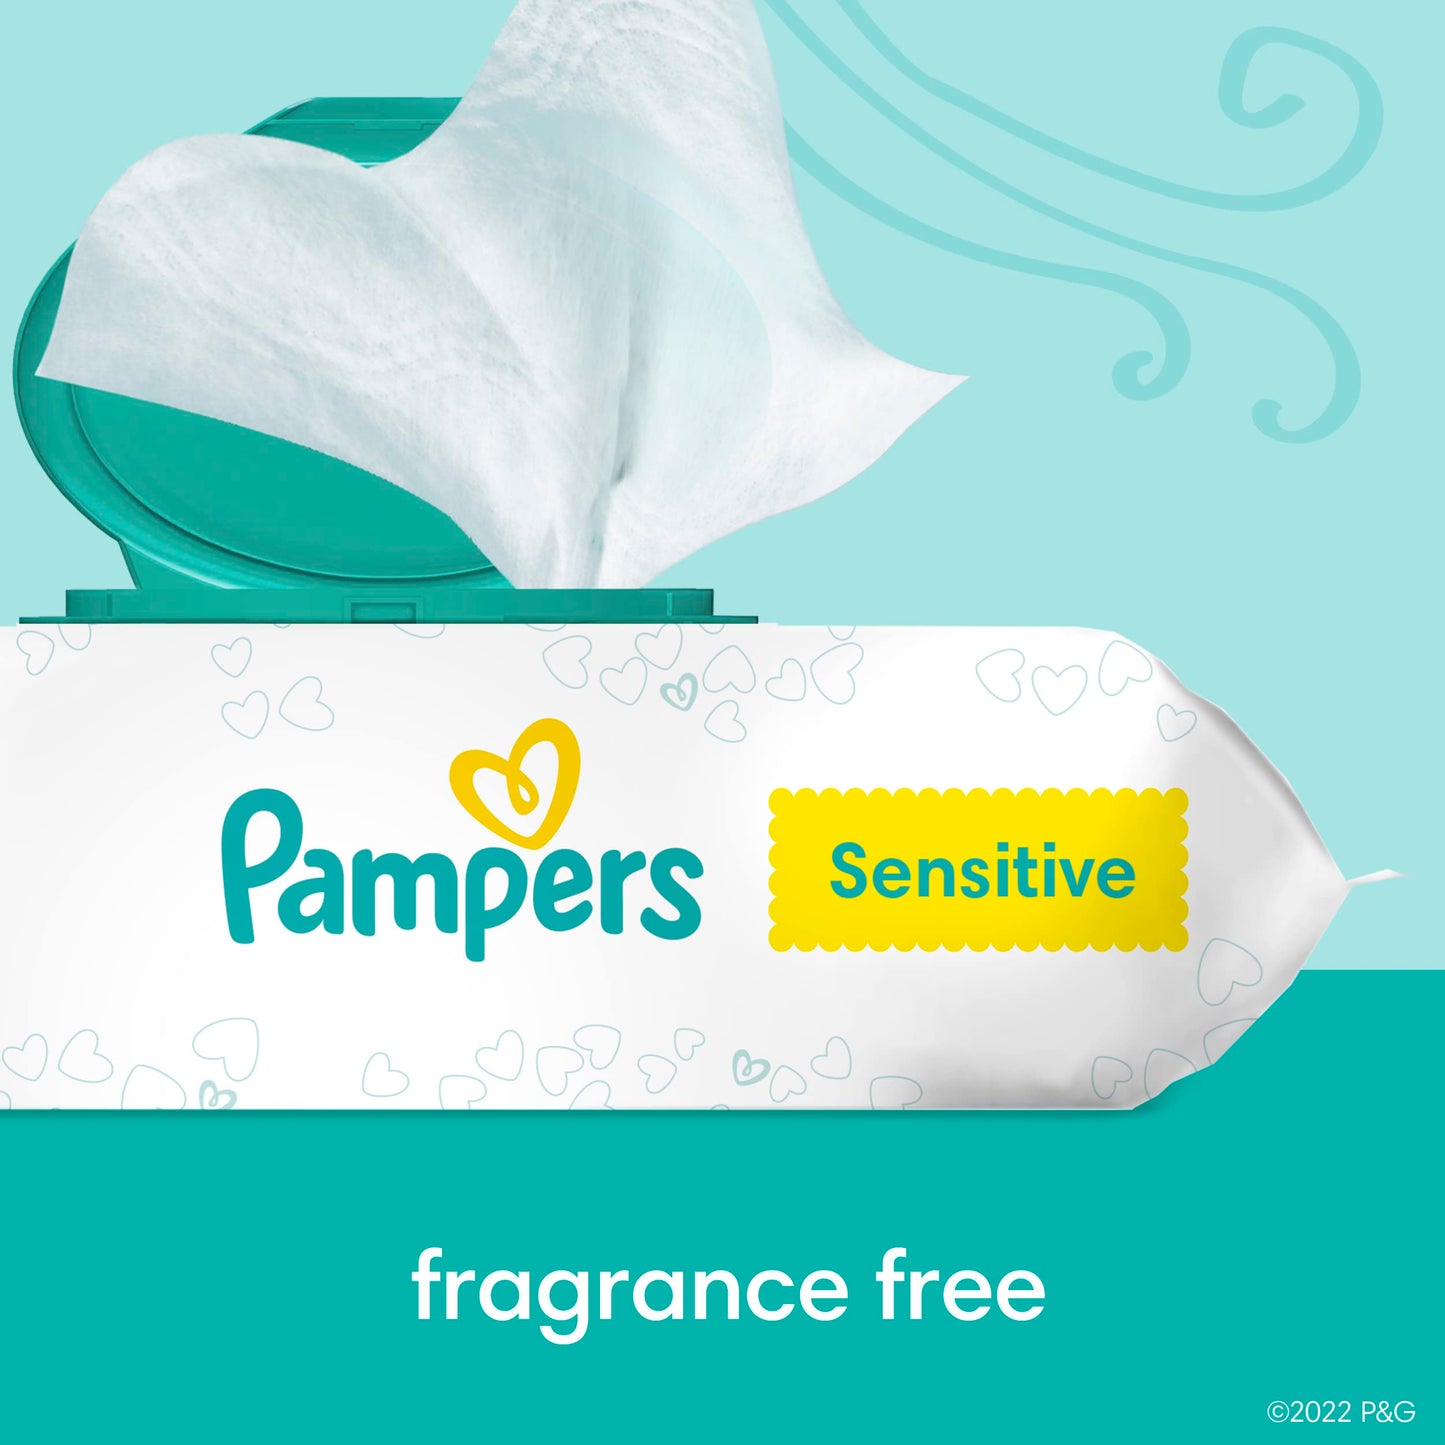 Pampers Sensitive Baby Wipes - 336 Count, Water Based, Hypoallergenic and Unscented (Packaging May Vary)